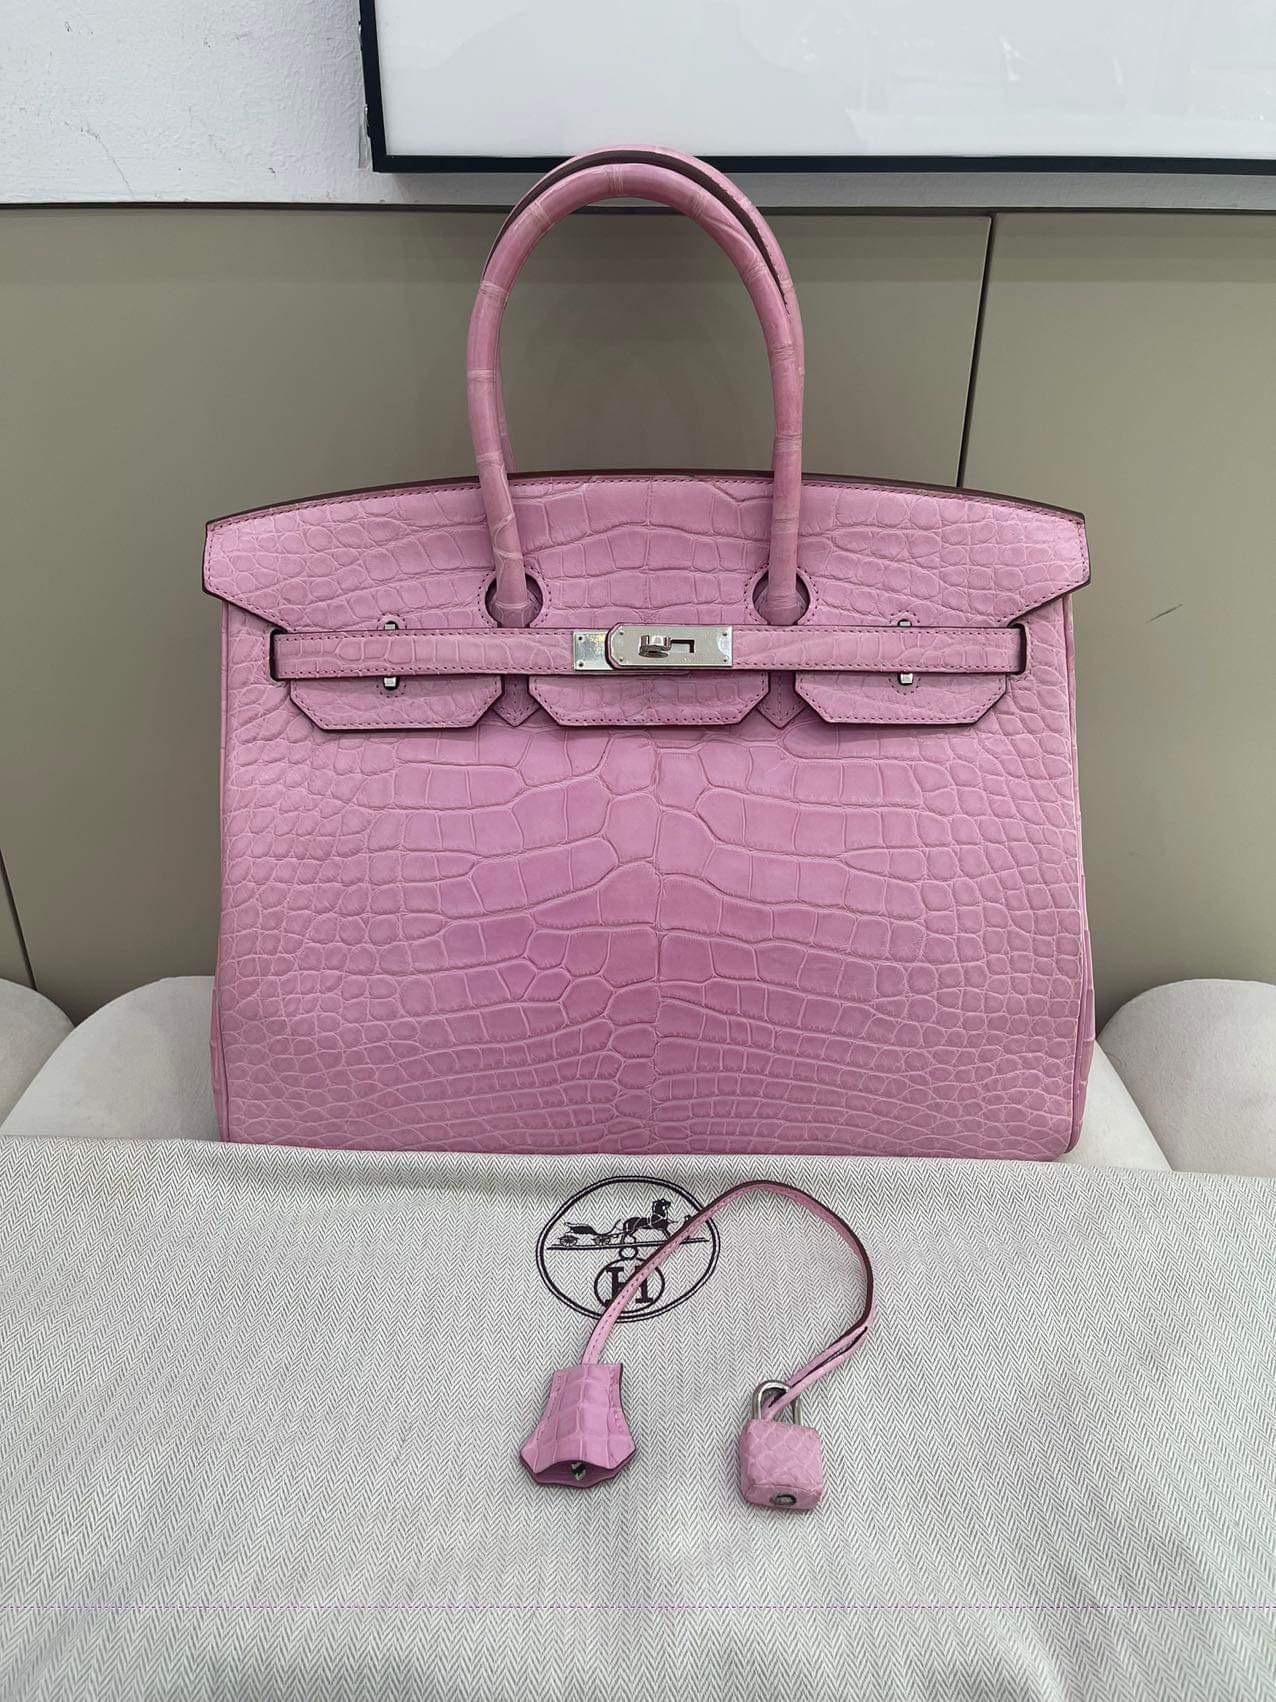 Guaranteed authentic Hermes Birkin 35 bag featured in the rare limited edition 5P Bubblegum Pink matte alligator.
Hermes, Bubblegum Pink Alligator Birkin in size 35, with palladium hardware.
This is the definition of a unicorn - on of Hermes rarest